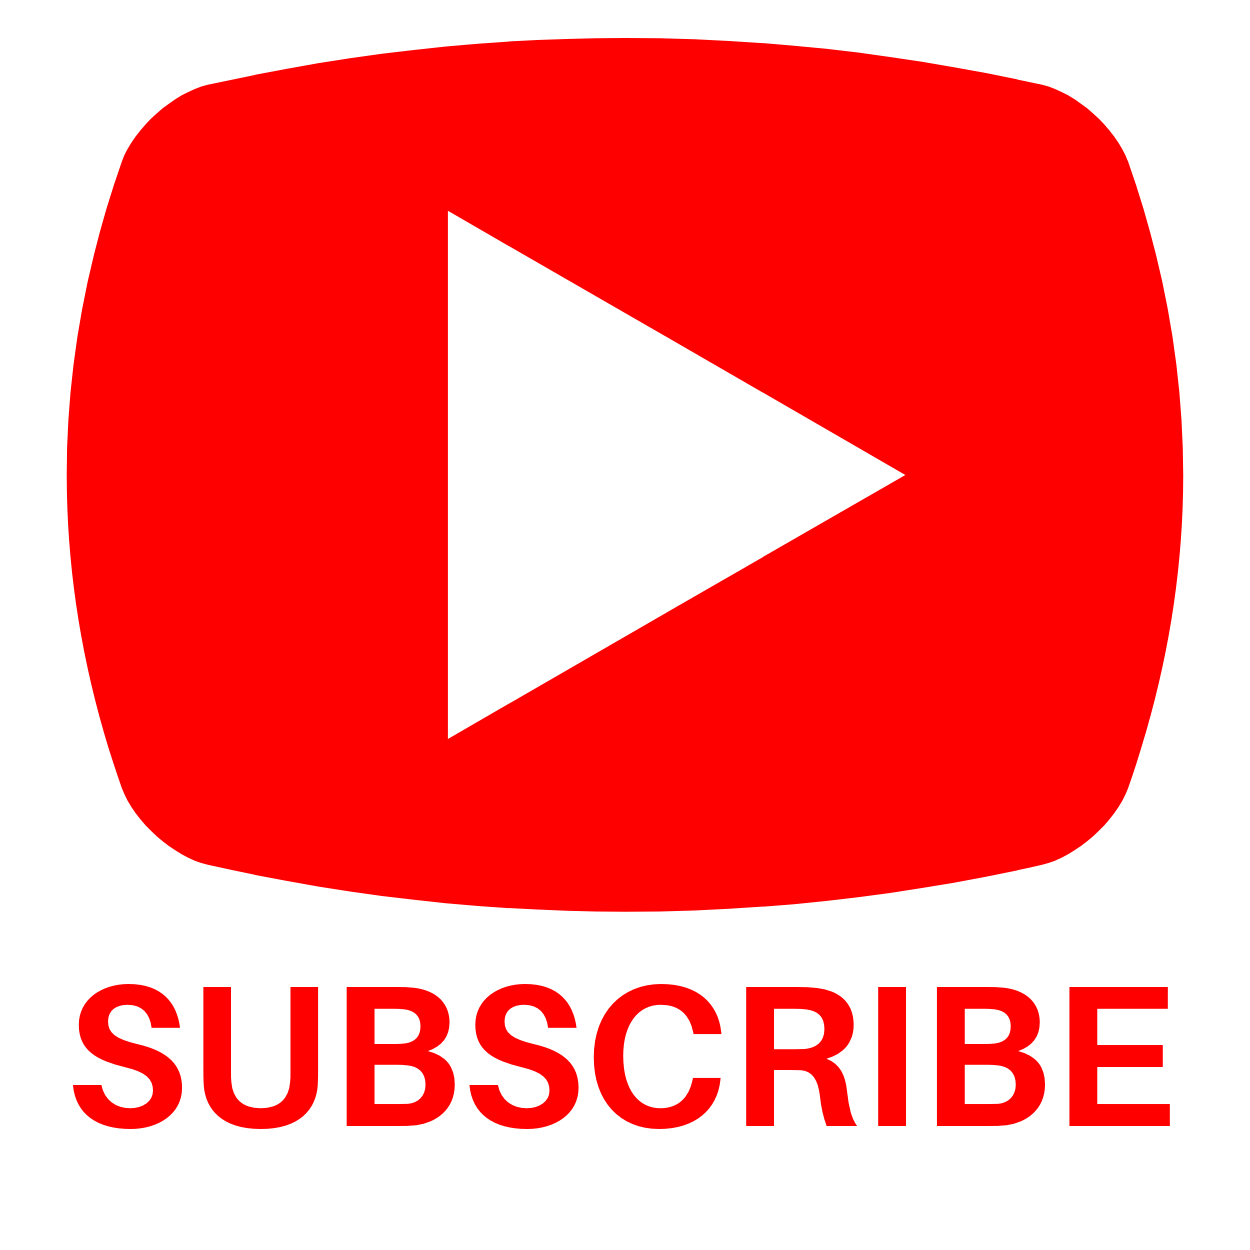 How to Quickly Add a Subscribe Button to Your YouTube Videos.